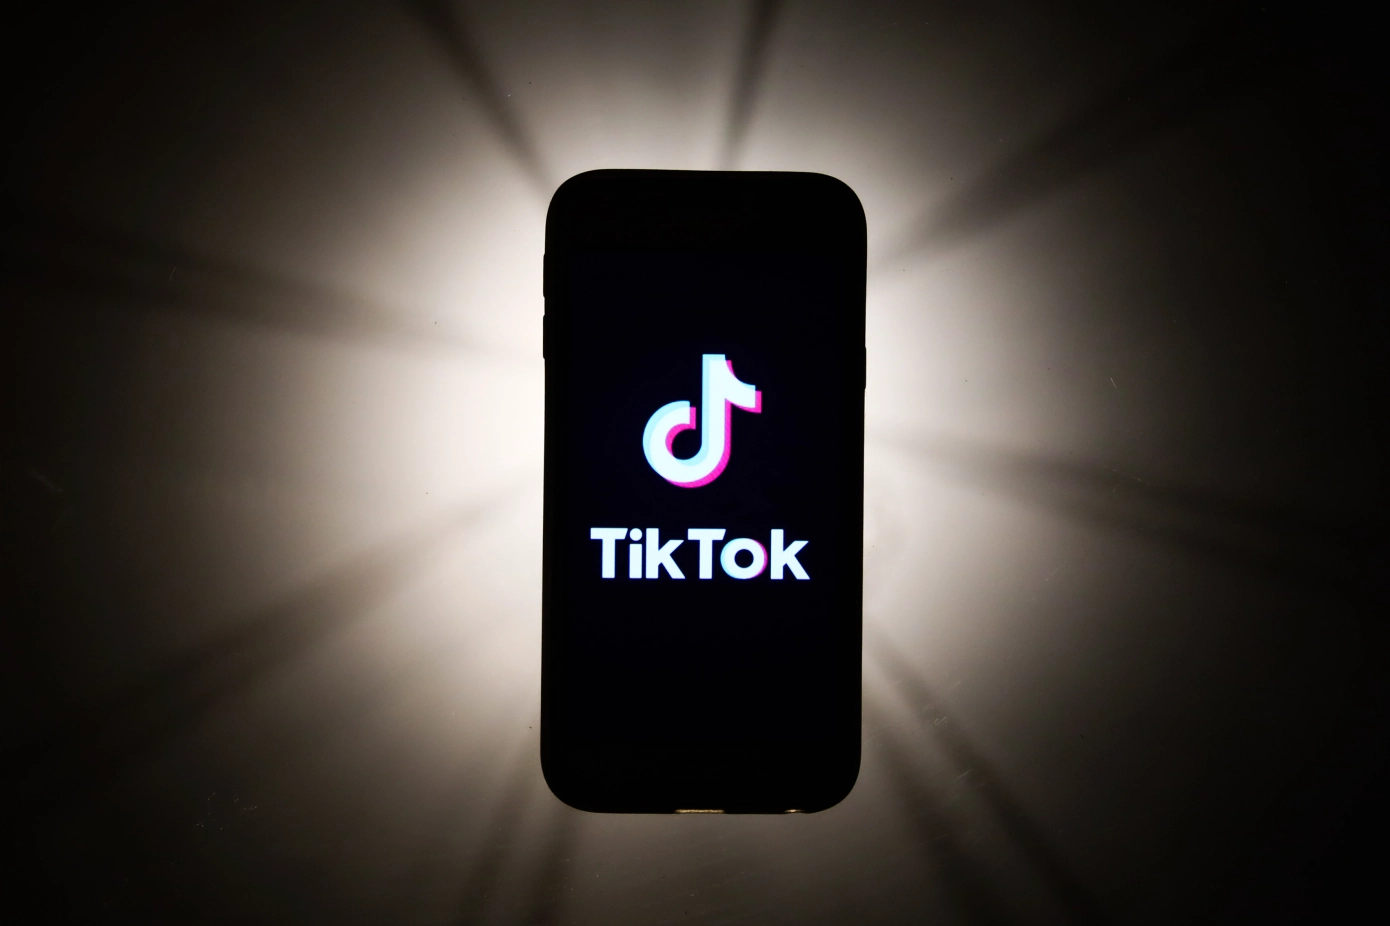 TikTok Hit With "Violating Children's Privacy", Fined by Dutch Agency